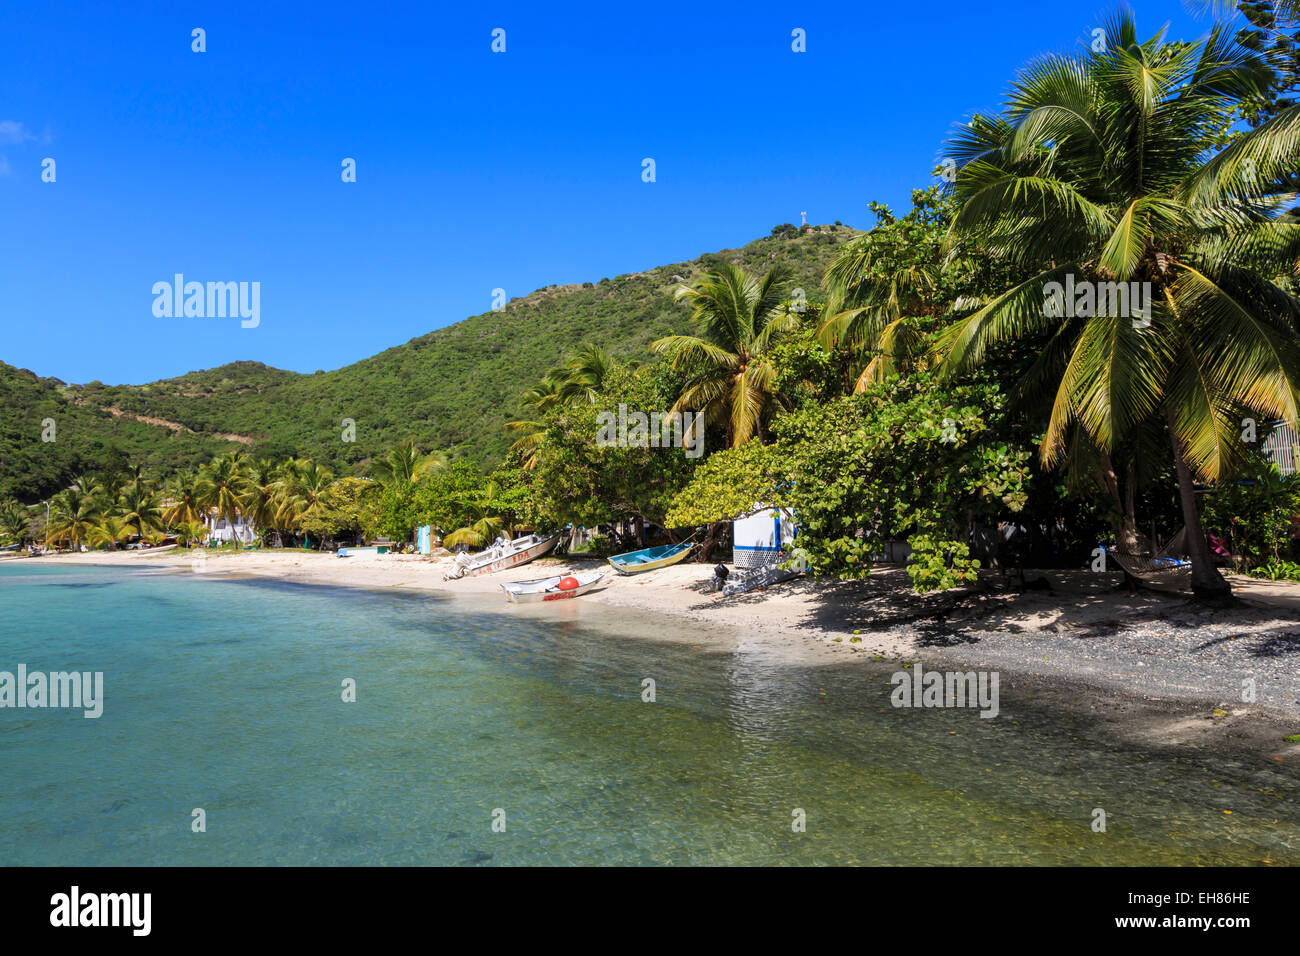 Clear water, beach, boats and palms, Great Harbour, Jost Van Dyke, British Virgin Islands, West Indies, Caribbean Stock Photo